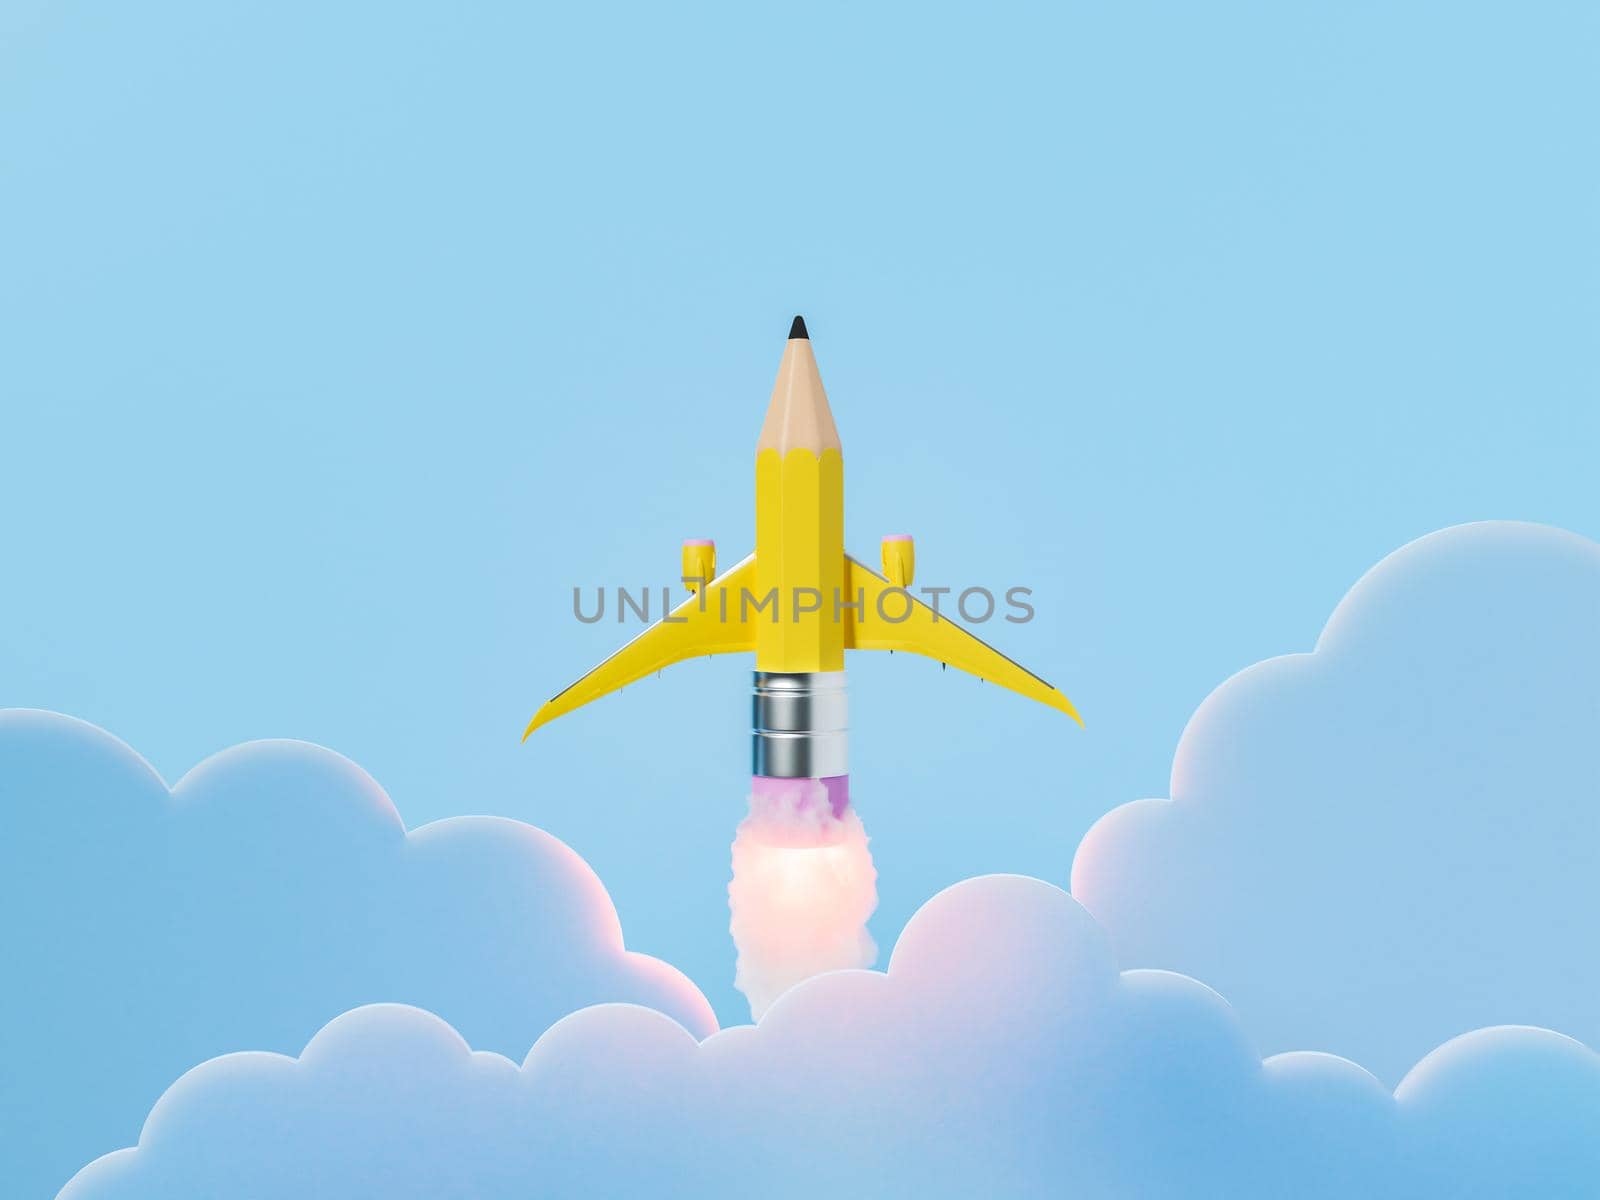 Lead pencil in form of rocket in blue sky by asolano